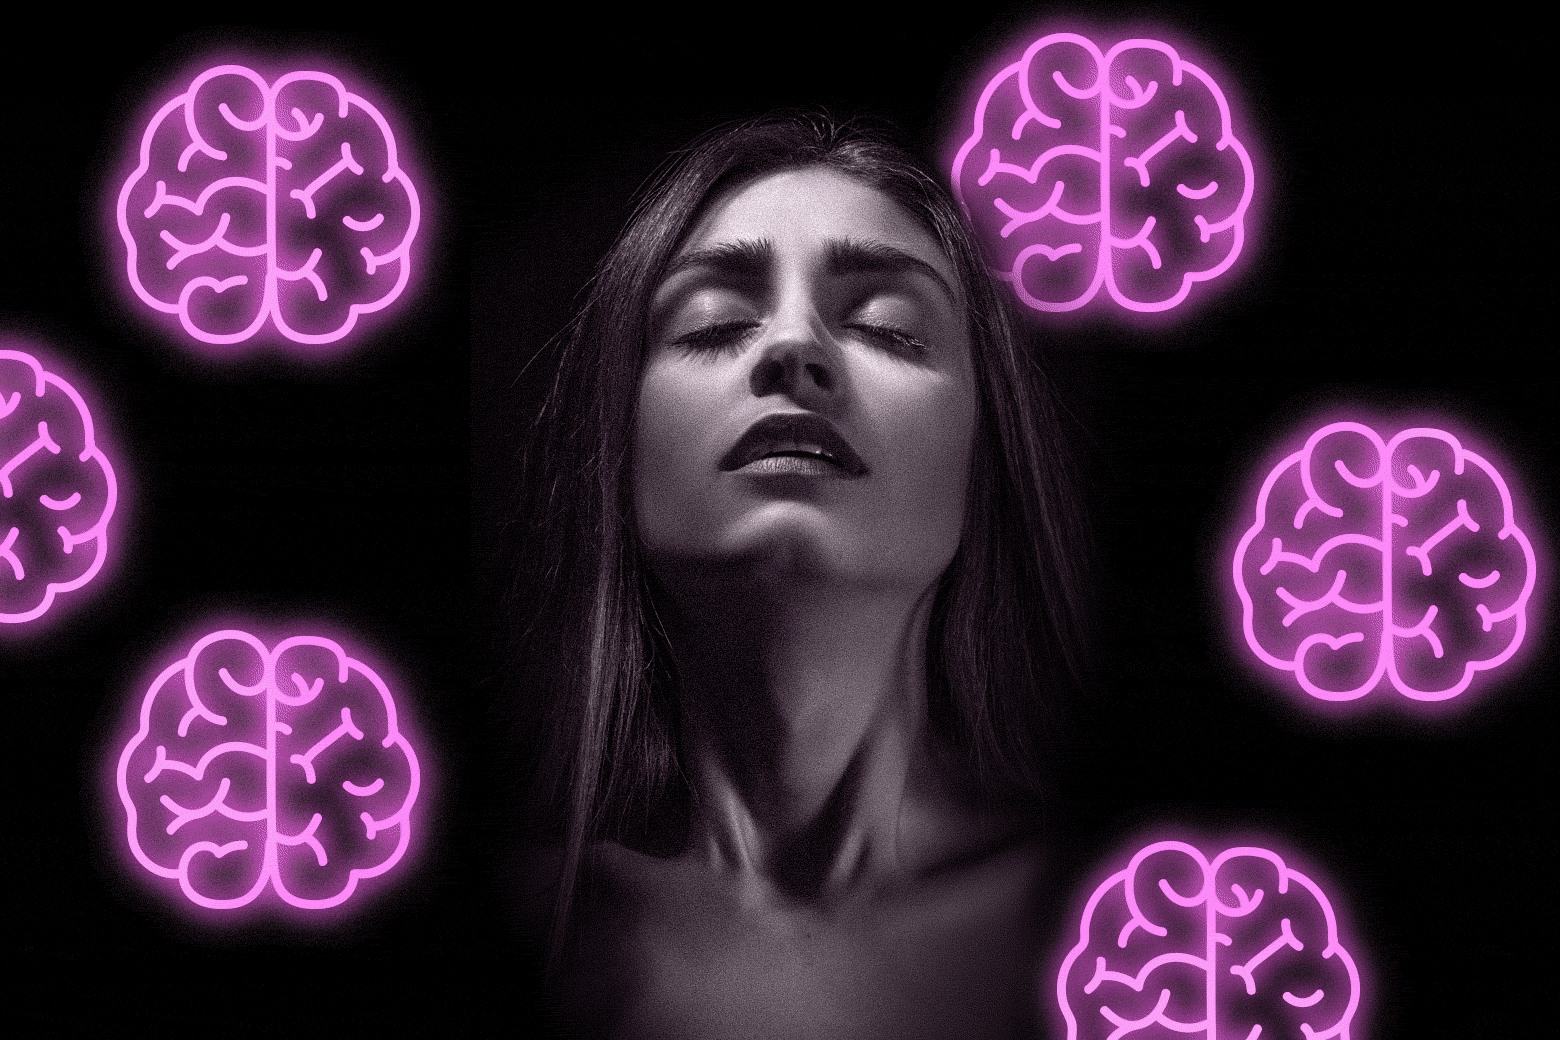 Collage of a woman surrounded by neon brains.